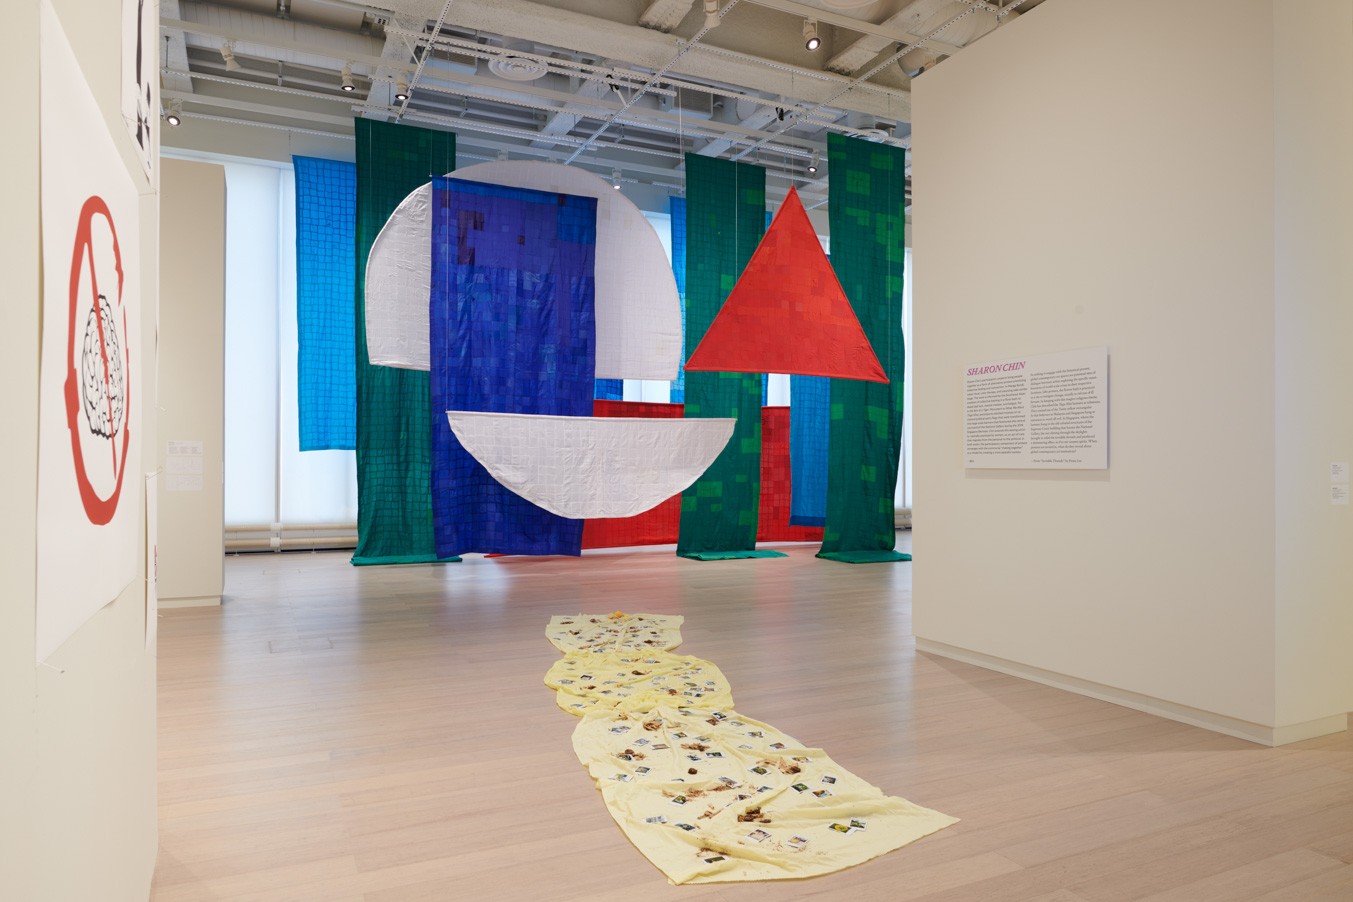 Installation view showing work by the artist Sharon Chin from the exhibition “The Protest and The Recuperation” on view at the Wallach Art Gallery, Columbia University. Photograph by Kyle Knodell.